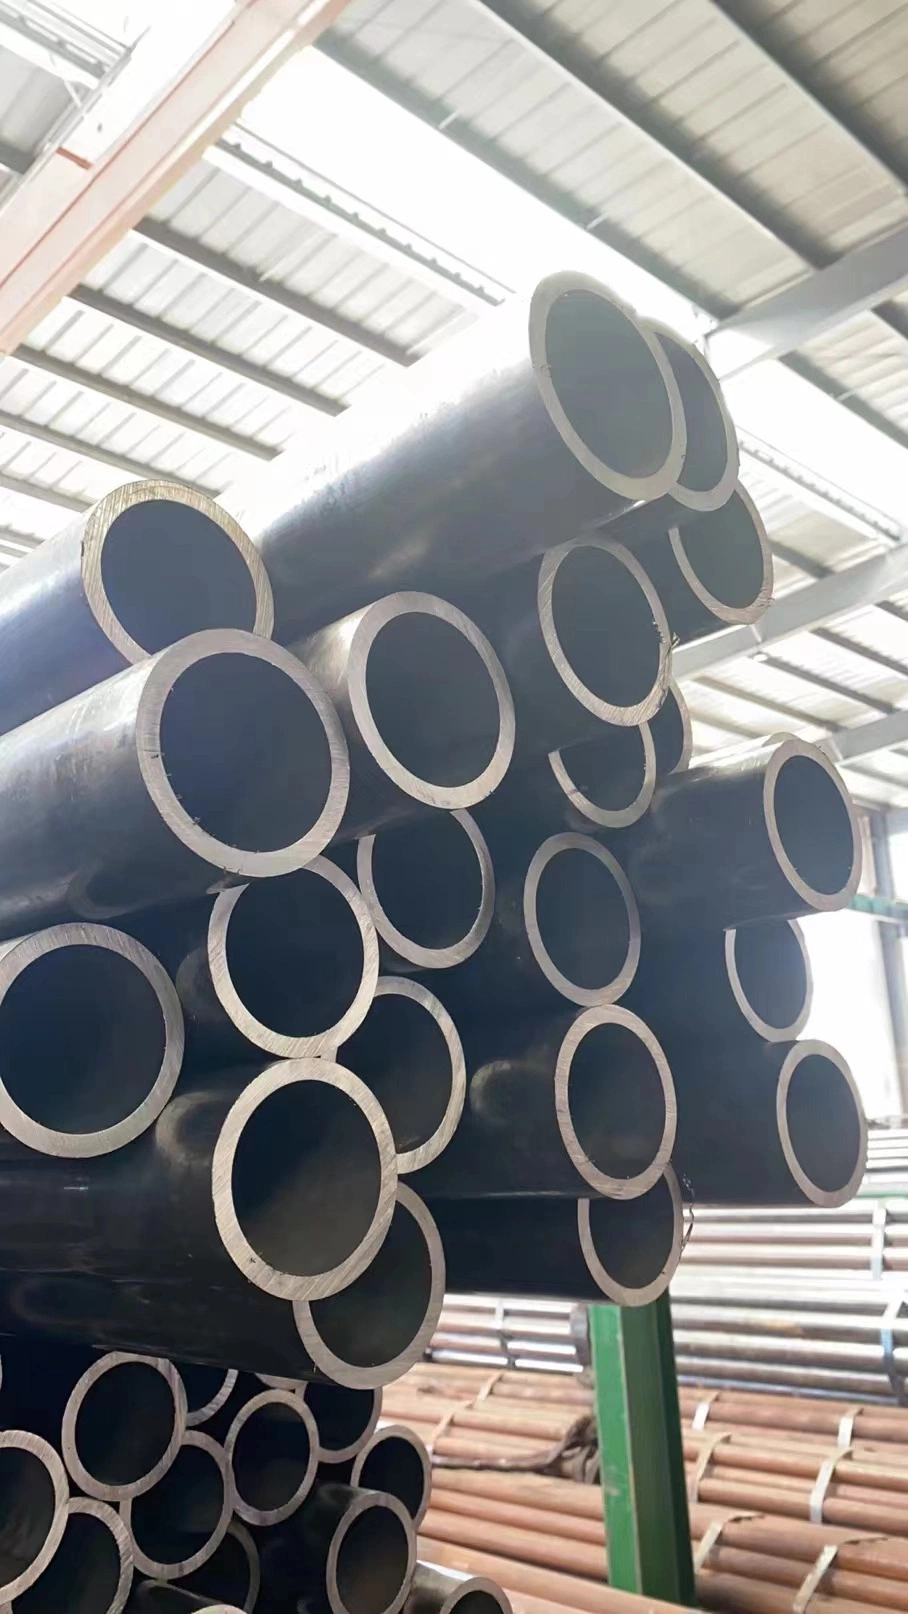 SAE1020 S20c Ss440 A36 Q235 1045 S45c C45 4140 En19 Scm440 40cr B7 42CrMo4 12L14 1215 1144 Tube Cold Drawn Hot Rolled Seamless and Weld Tube Od 8mm-600mm